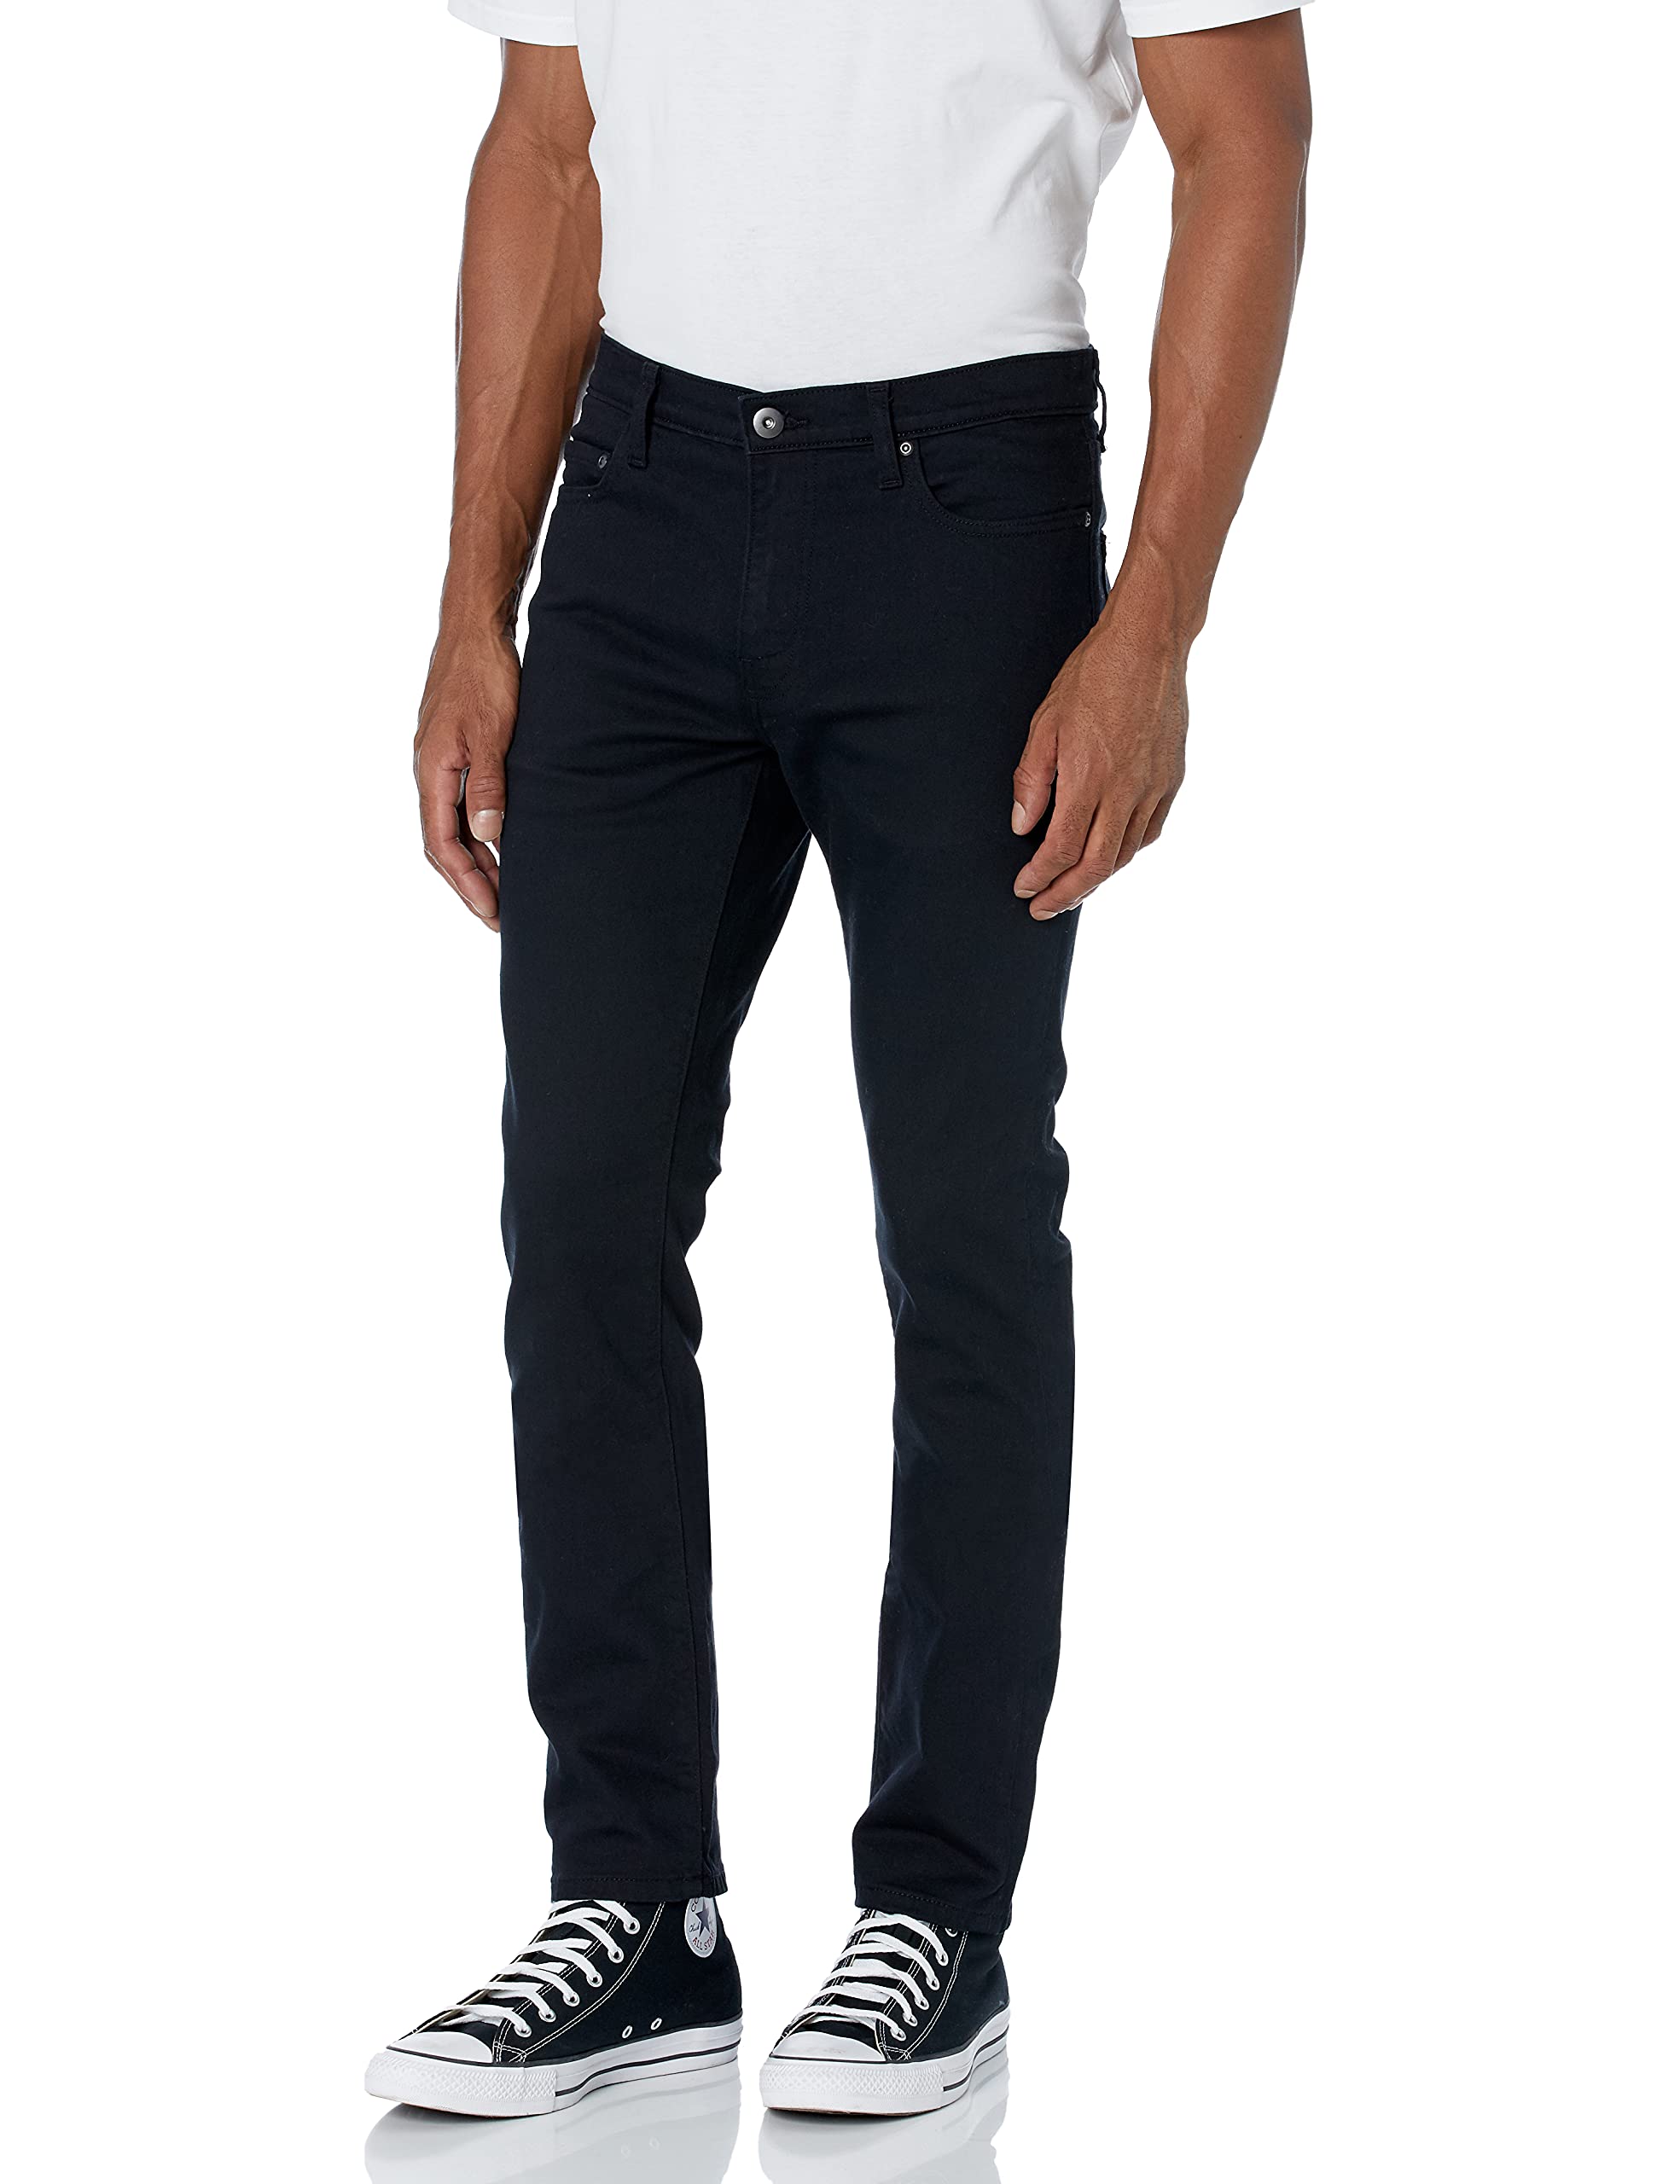 Amazon Essentials Men's Skinny-Fit Comfort Stretch Jean (Previously Goodthreads)